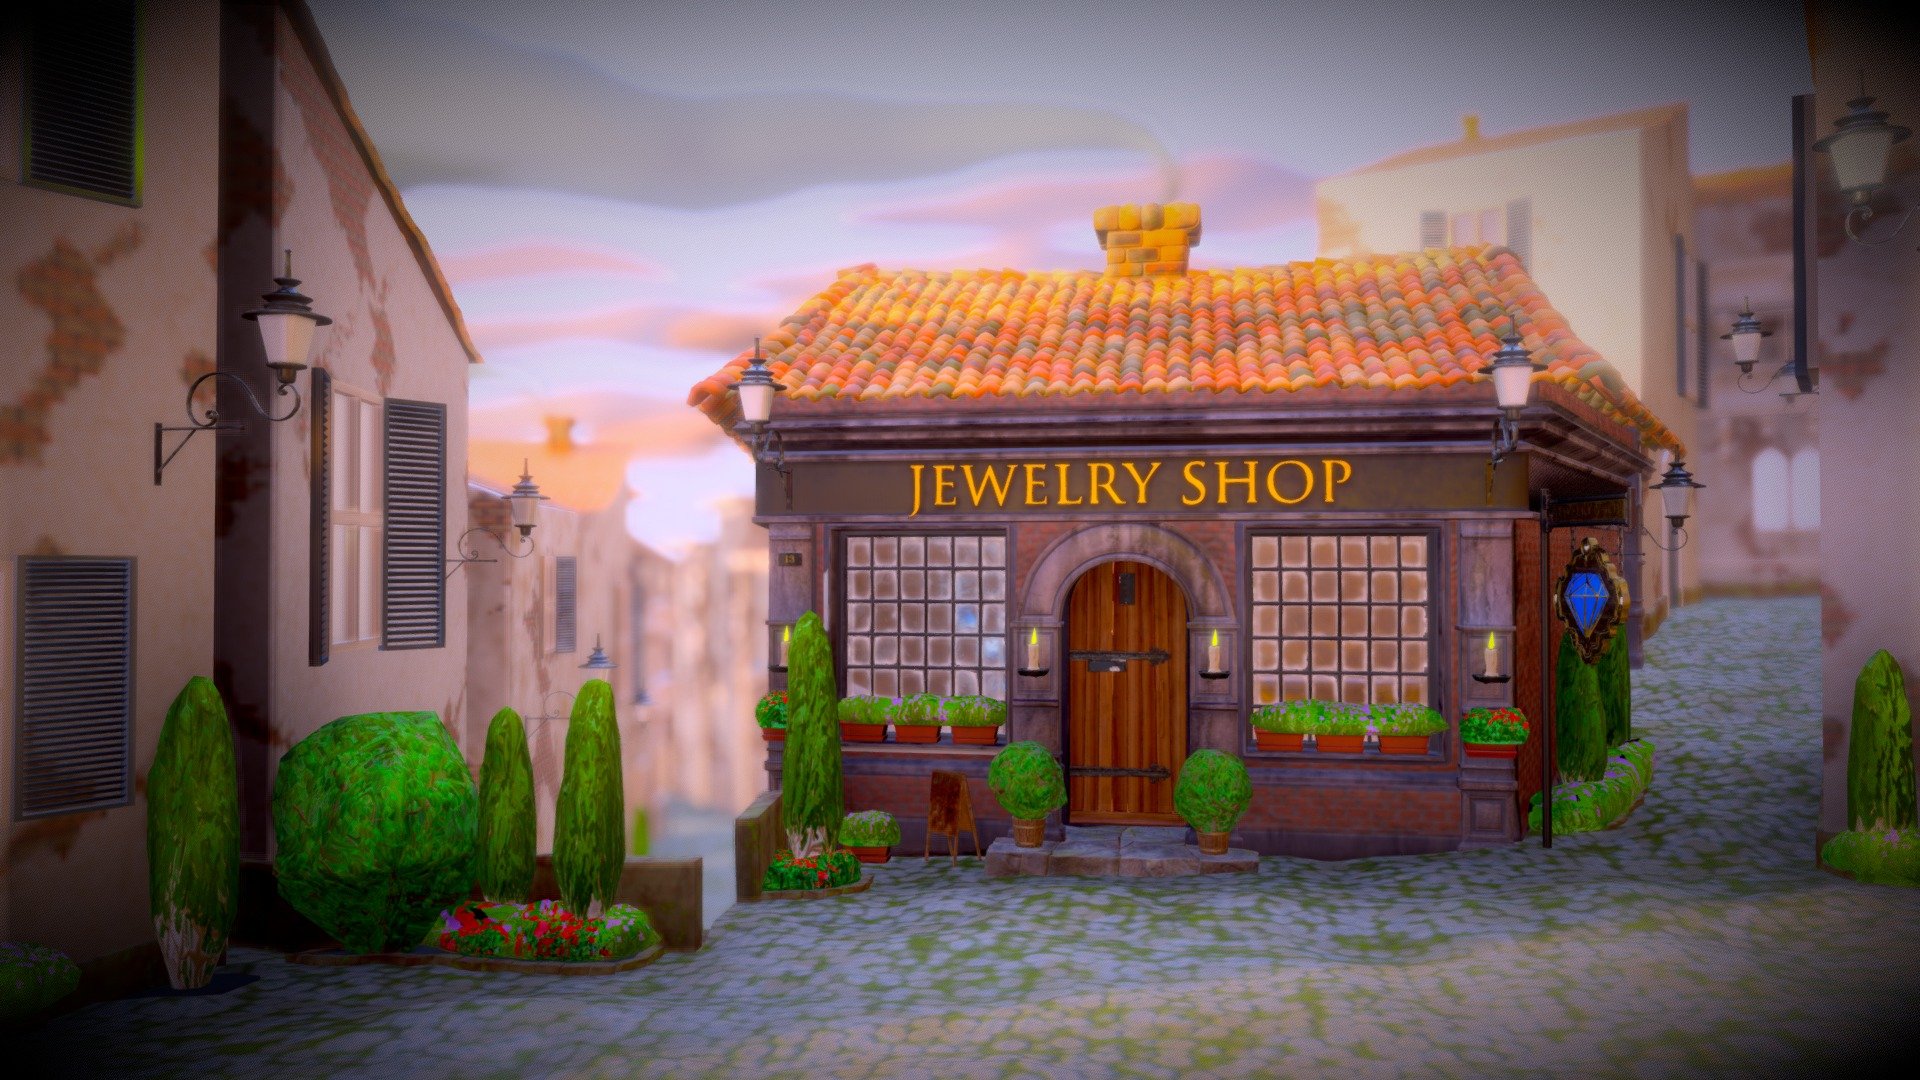 A moody little village and a mysterious jewellery shop.
I made this for rendering, so the meshes and UV's are not perfectly optimized.
I didn't use any purchased assets for this, so everything is modeled by me.
Shaders were almost all procedural originally. I baked them into bitmap textures with Arnold.
I had to reduce the plant models to simple ones due to Sketchfab file size limit 3d model